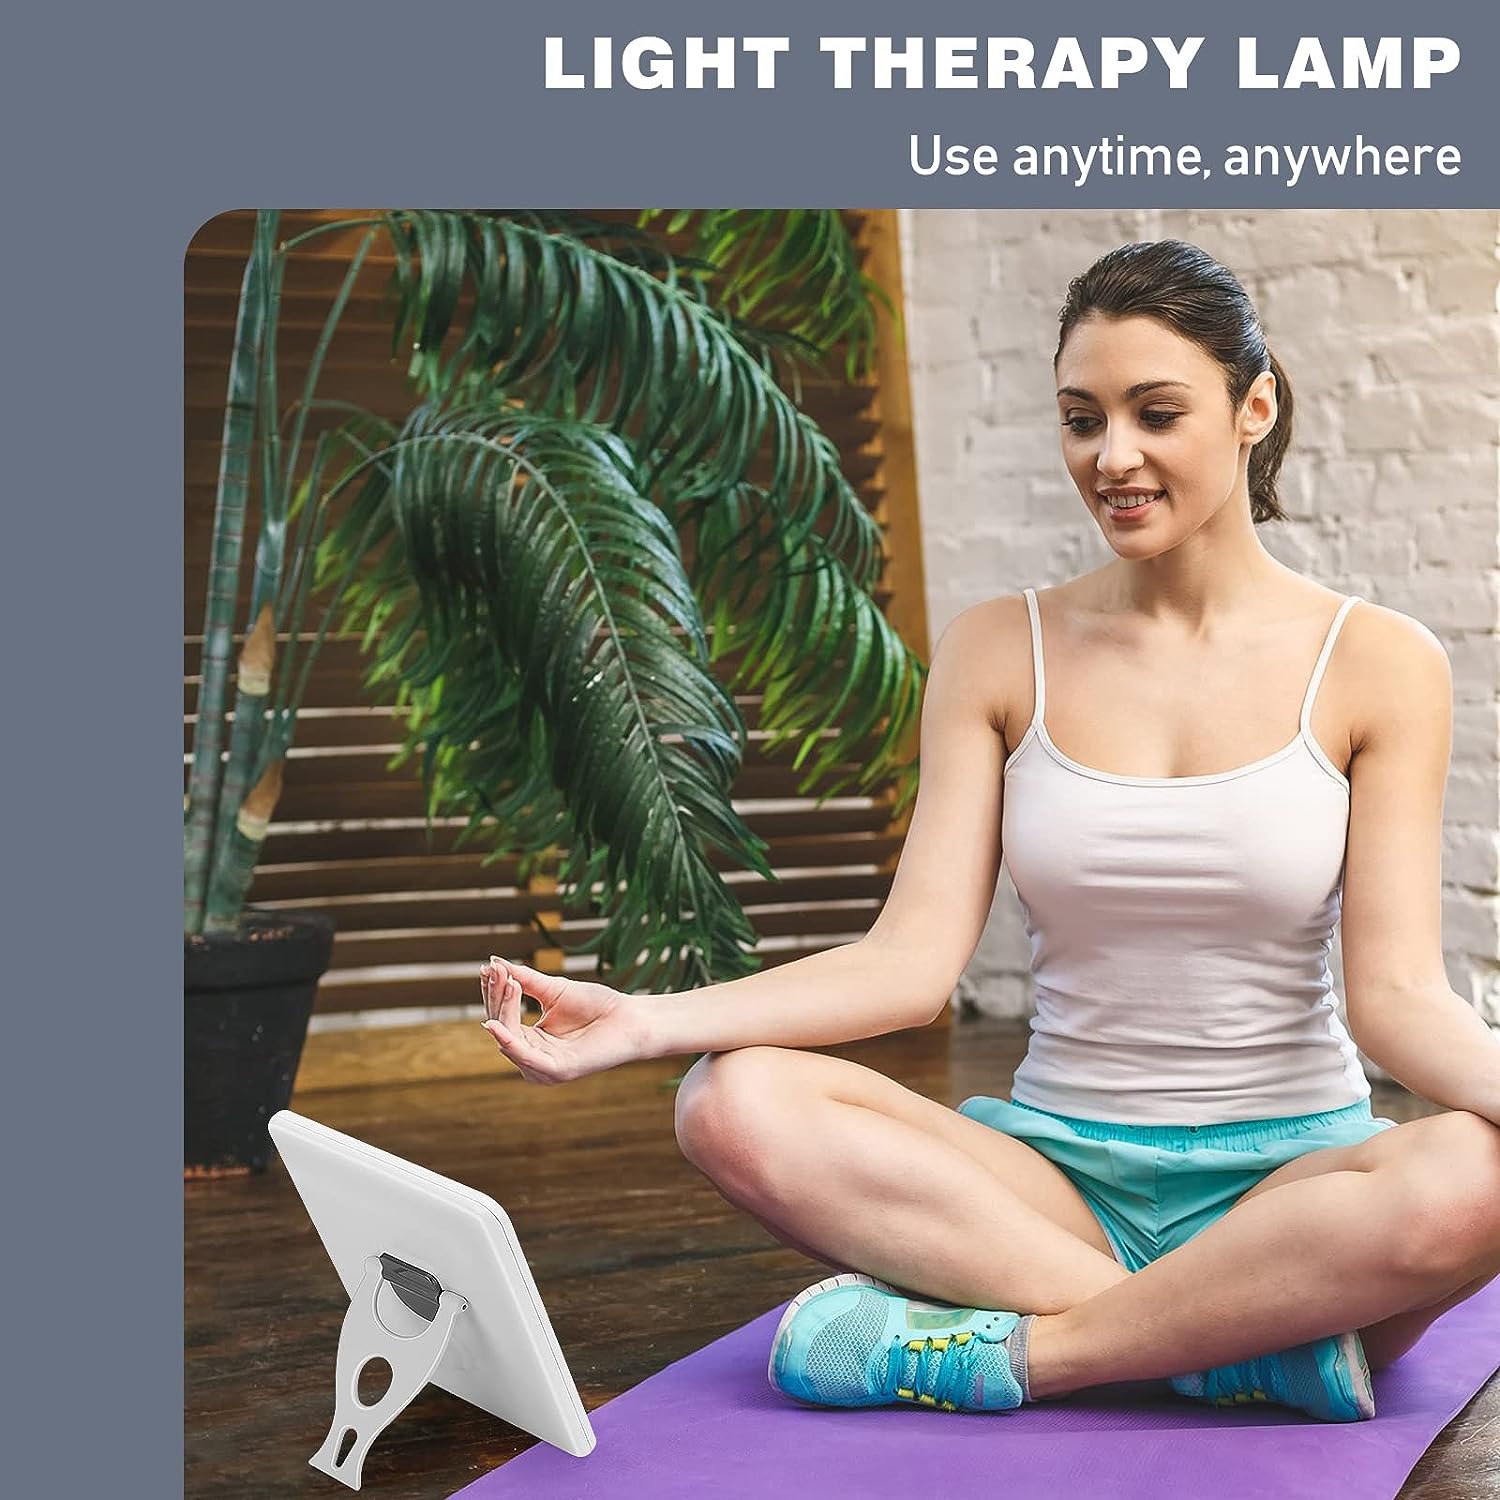 Remarkable Light Therapy Lamp Review